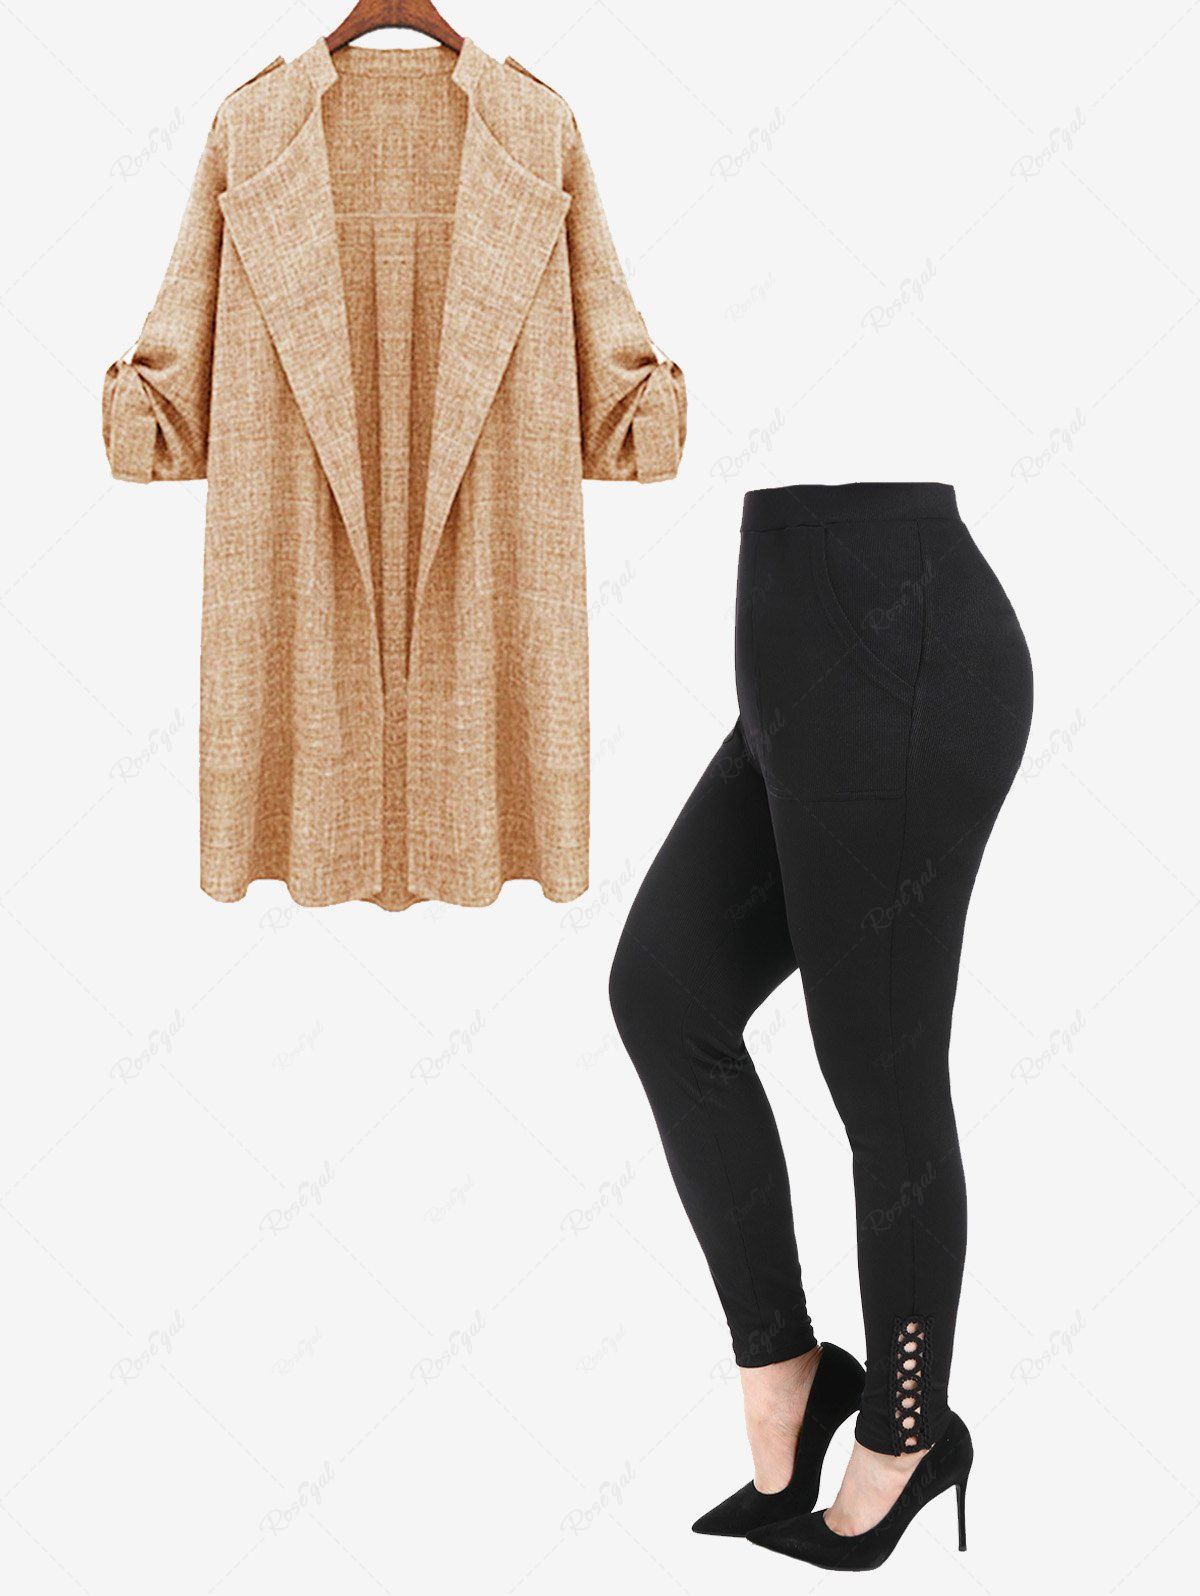 Buy Roll Up Sleeve Open Front Coat and Hollow Out High Rise Leggings with Pockets Plus Size Outerwear Outfit  